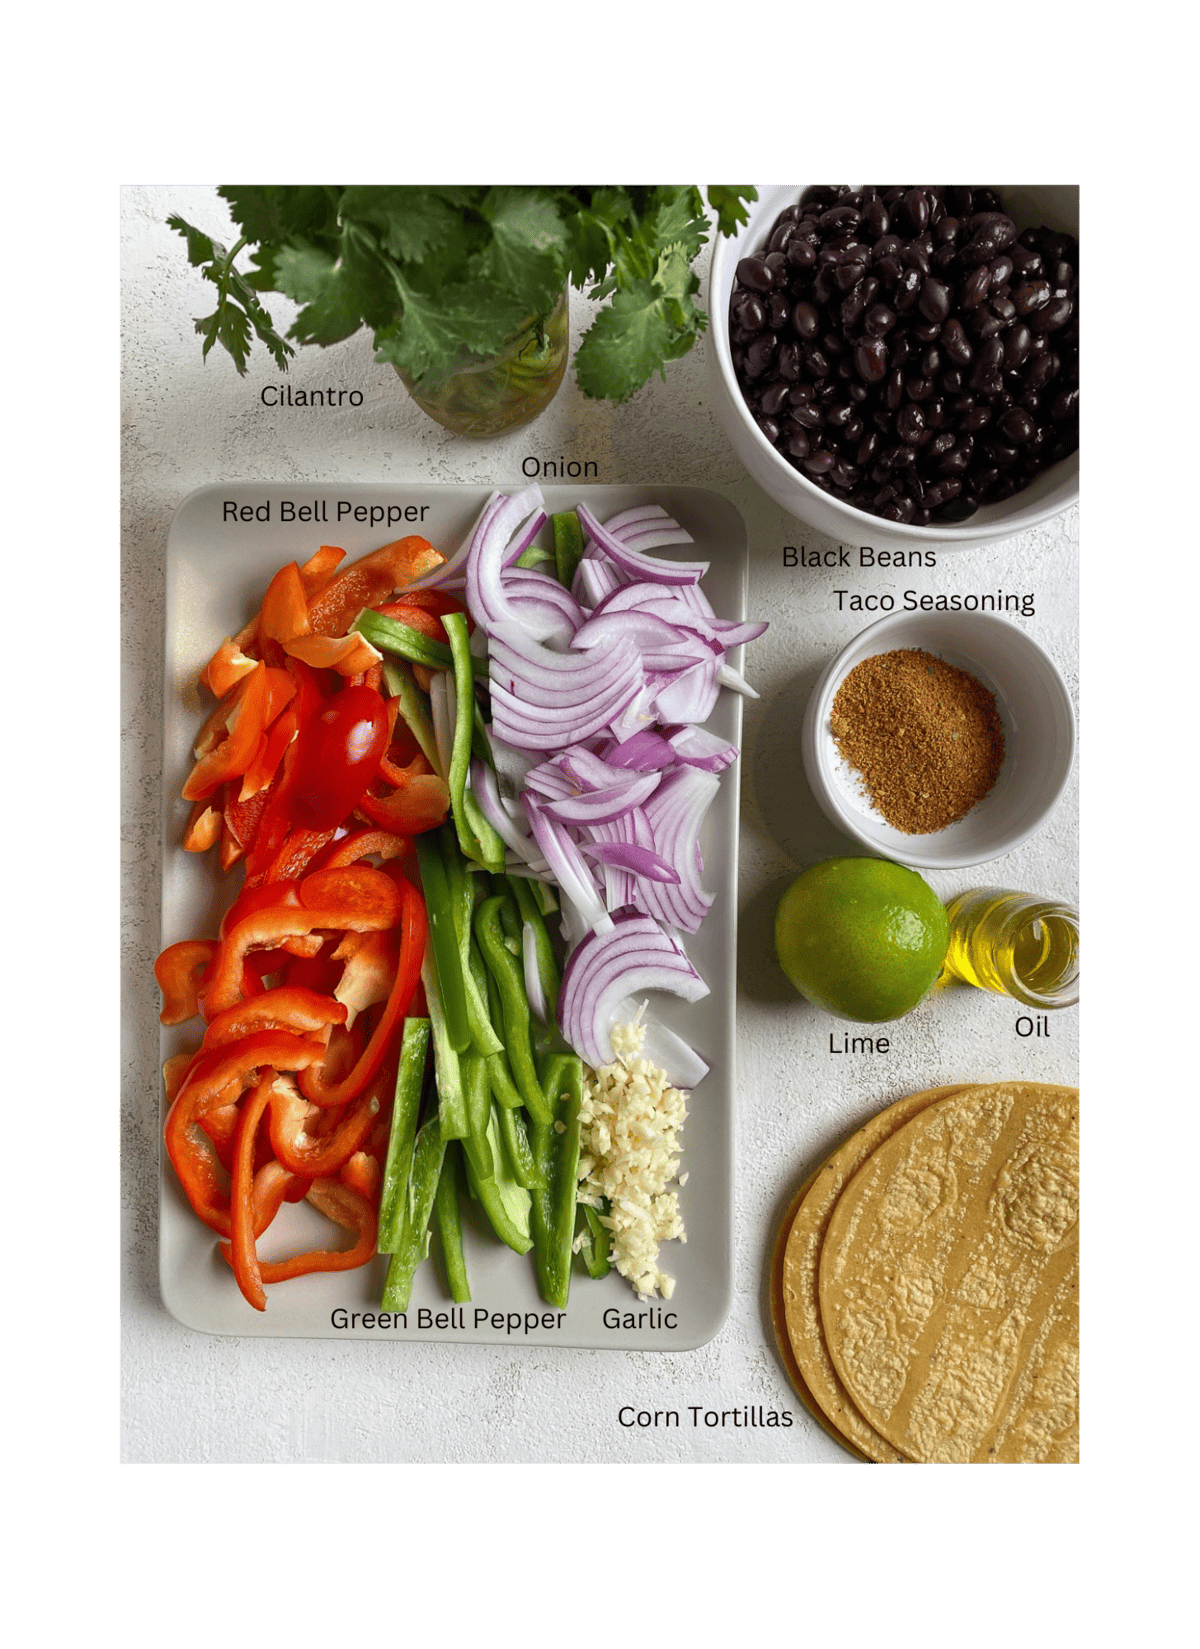 ingredients for Vegan Fajita Tacos a،nst a white surface